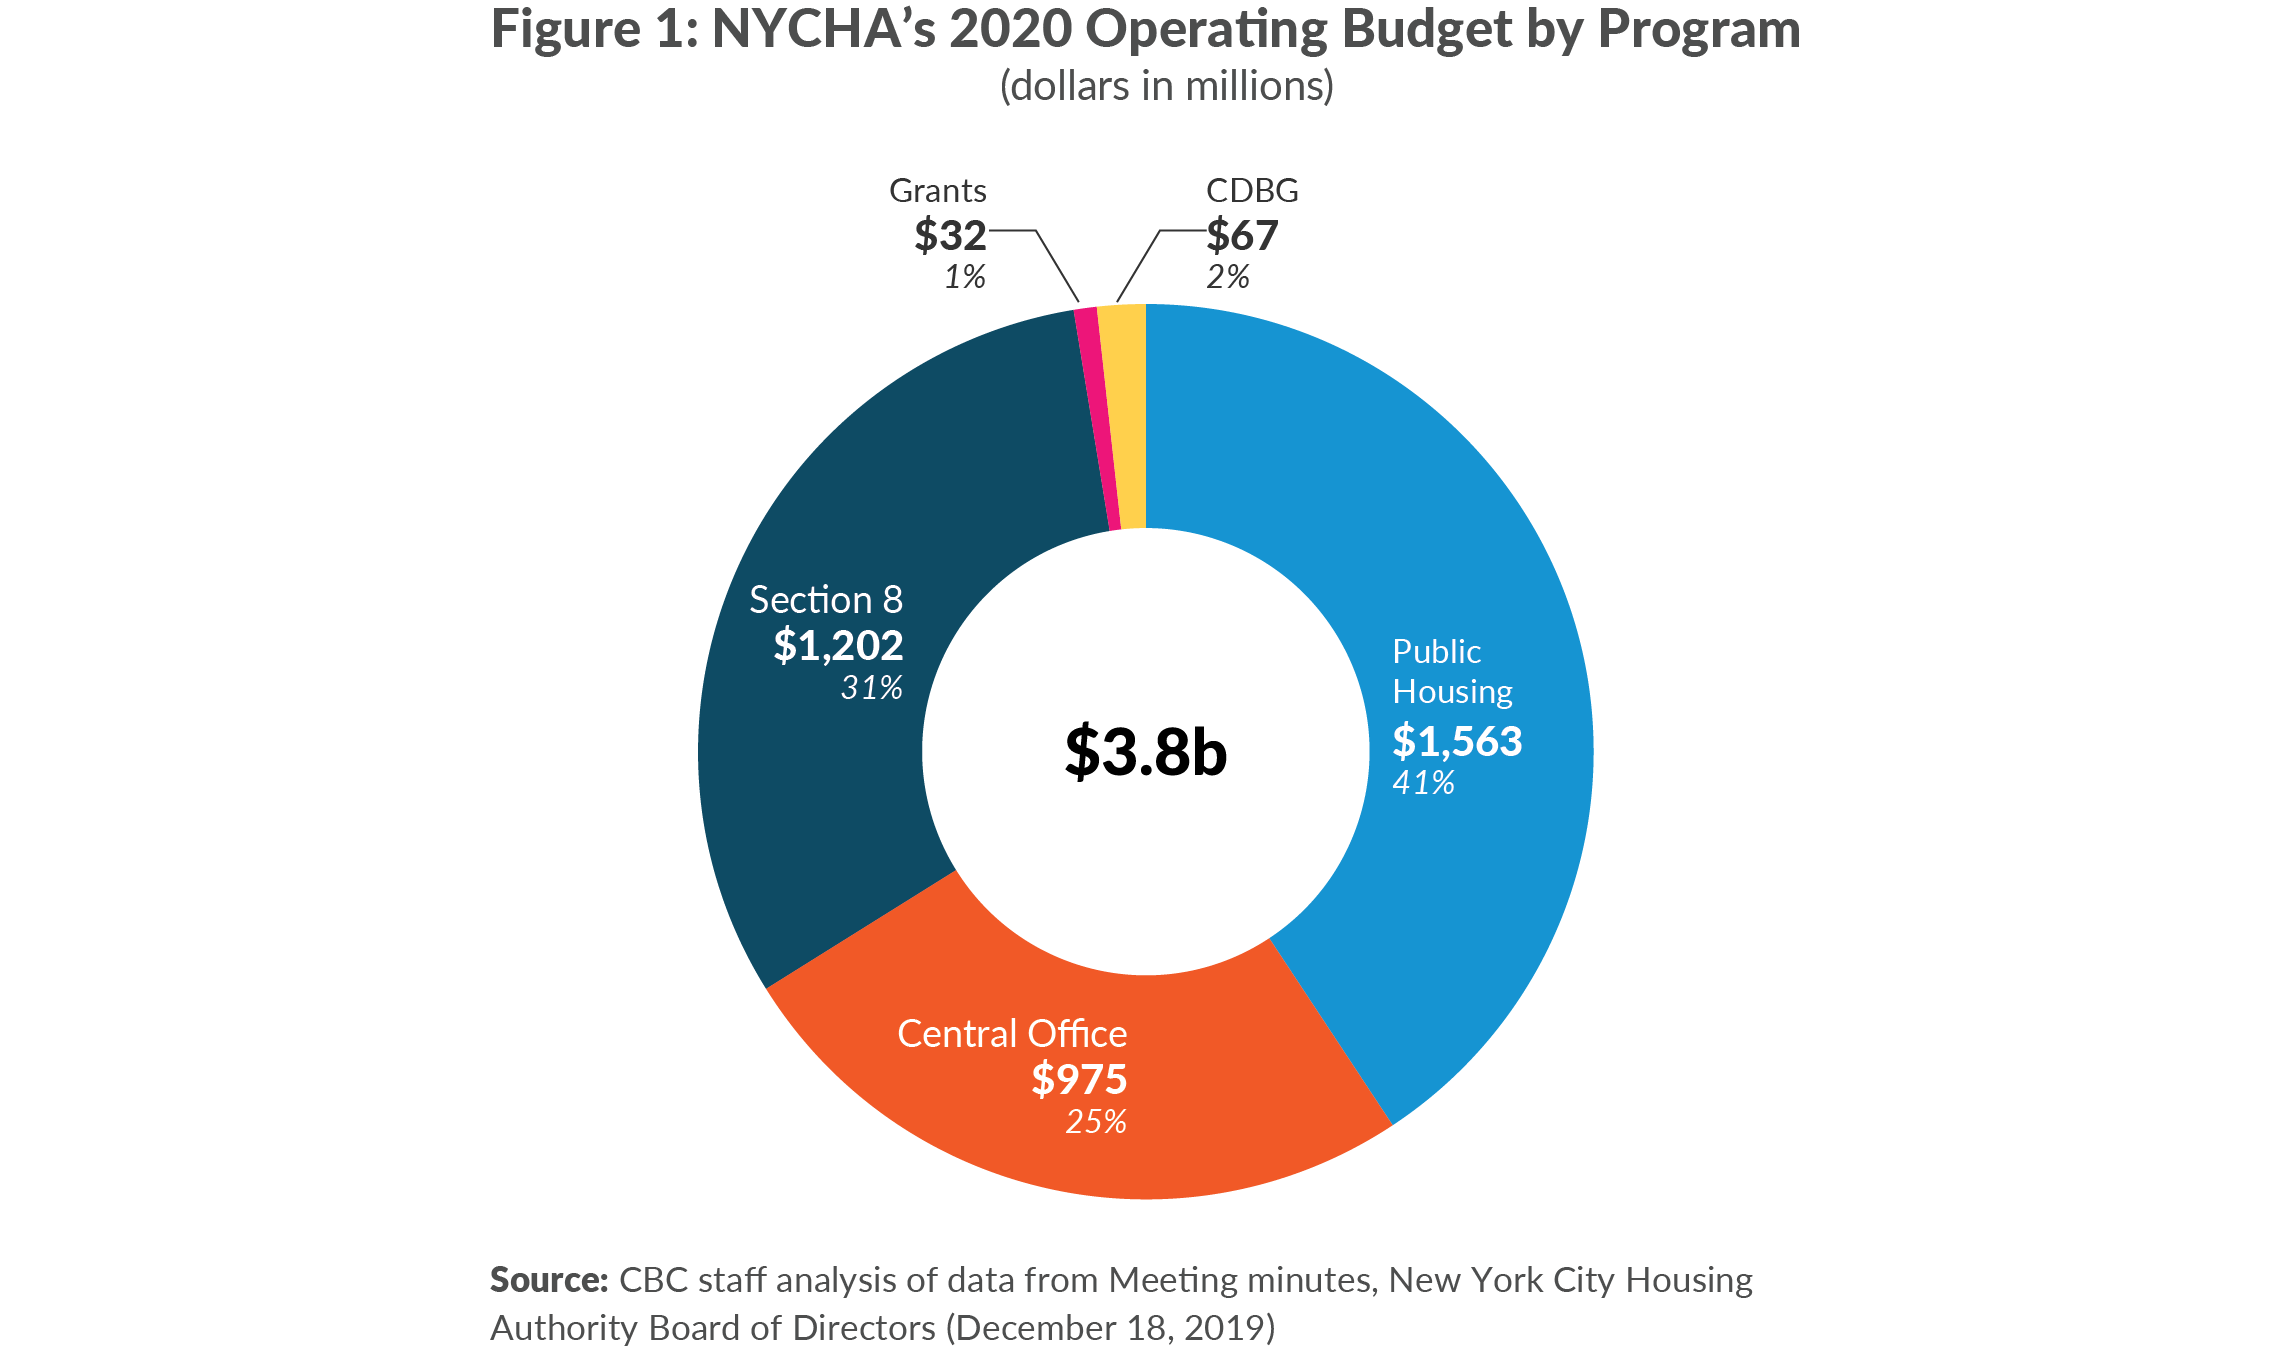 Figure 1. NYCHA’s 2020 Operating Budget by Program (dollars in millions) 